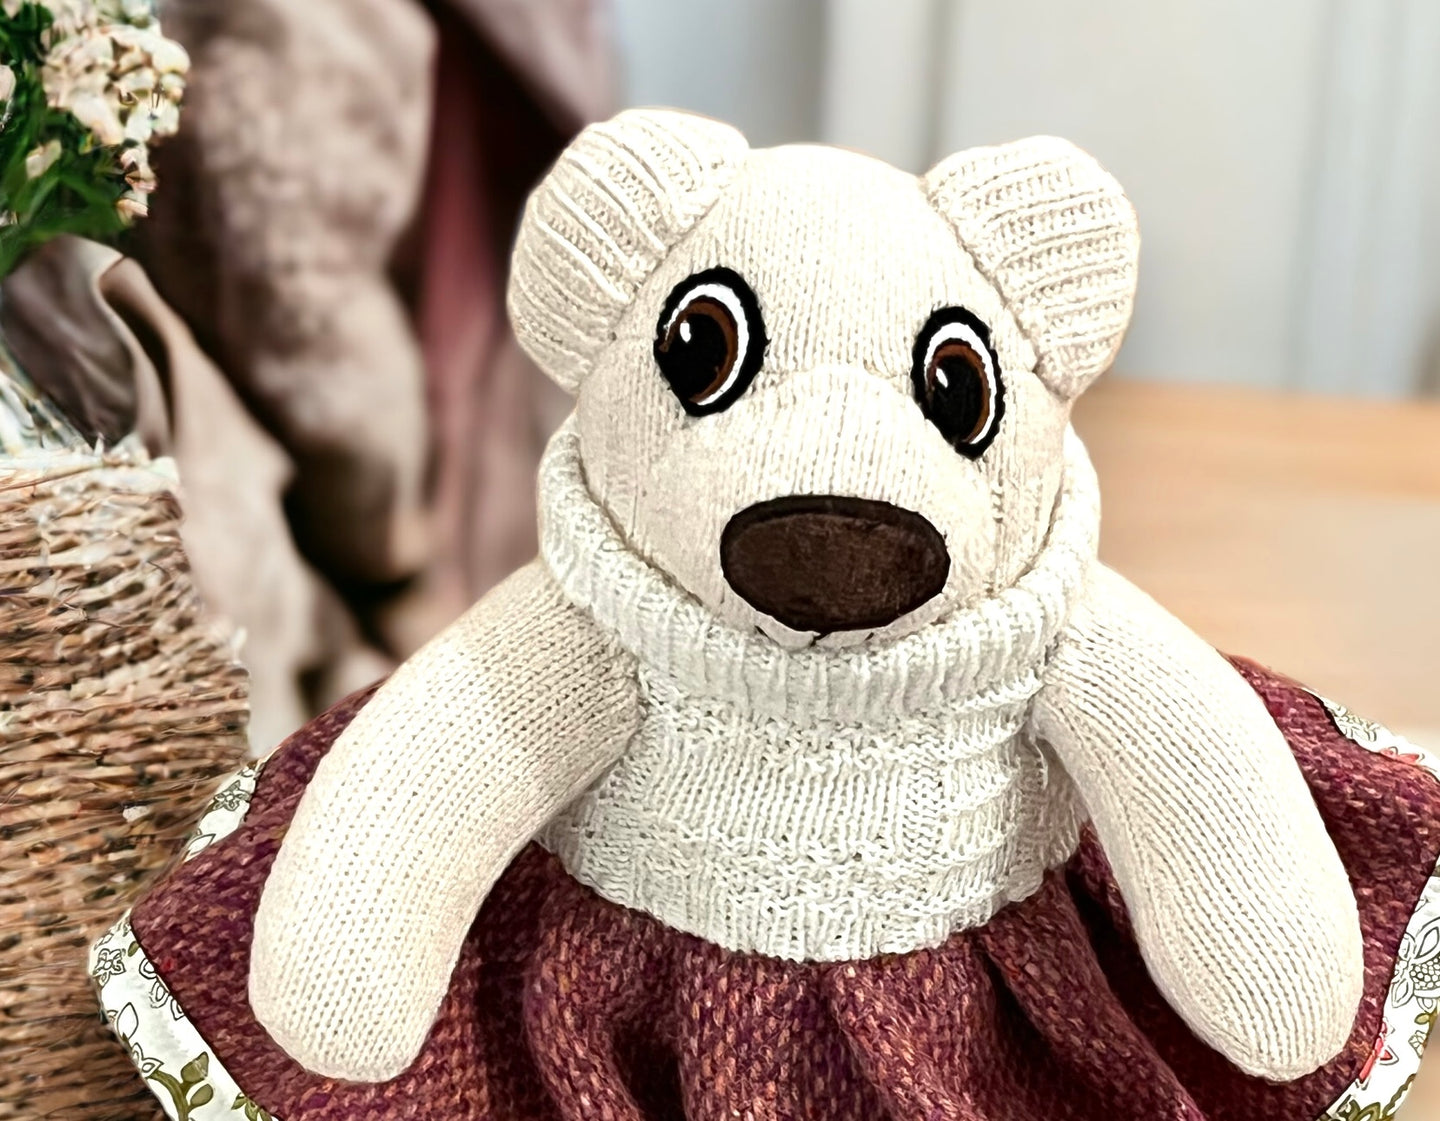 Traditional , handmade soft toys  to be cherished